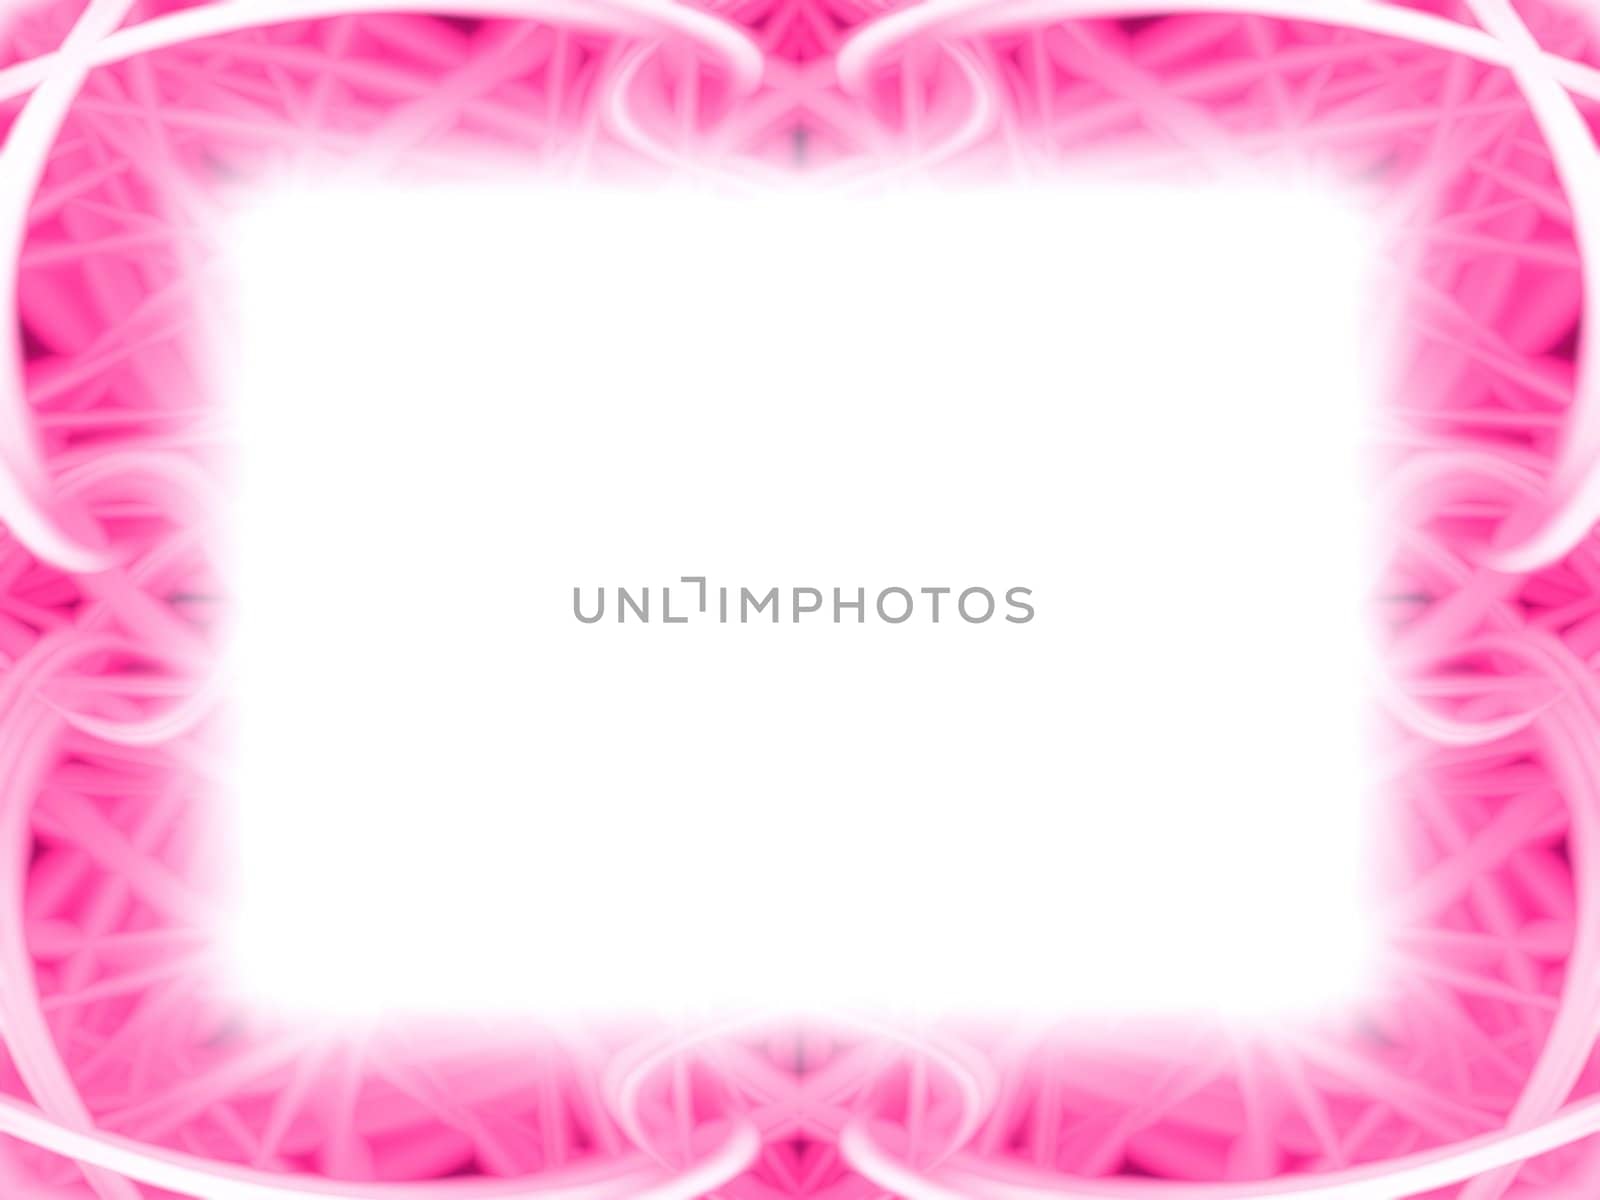 Curved pink frame with white background.